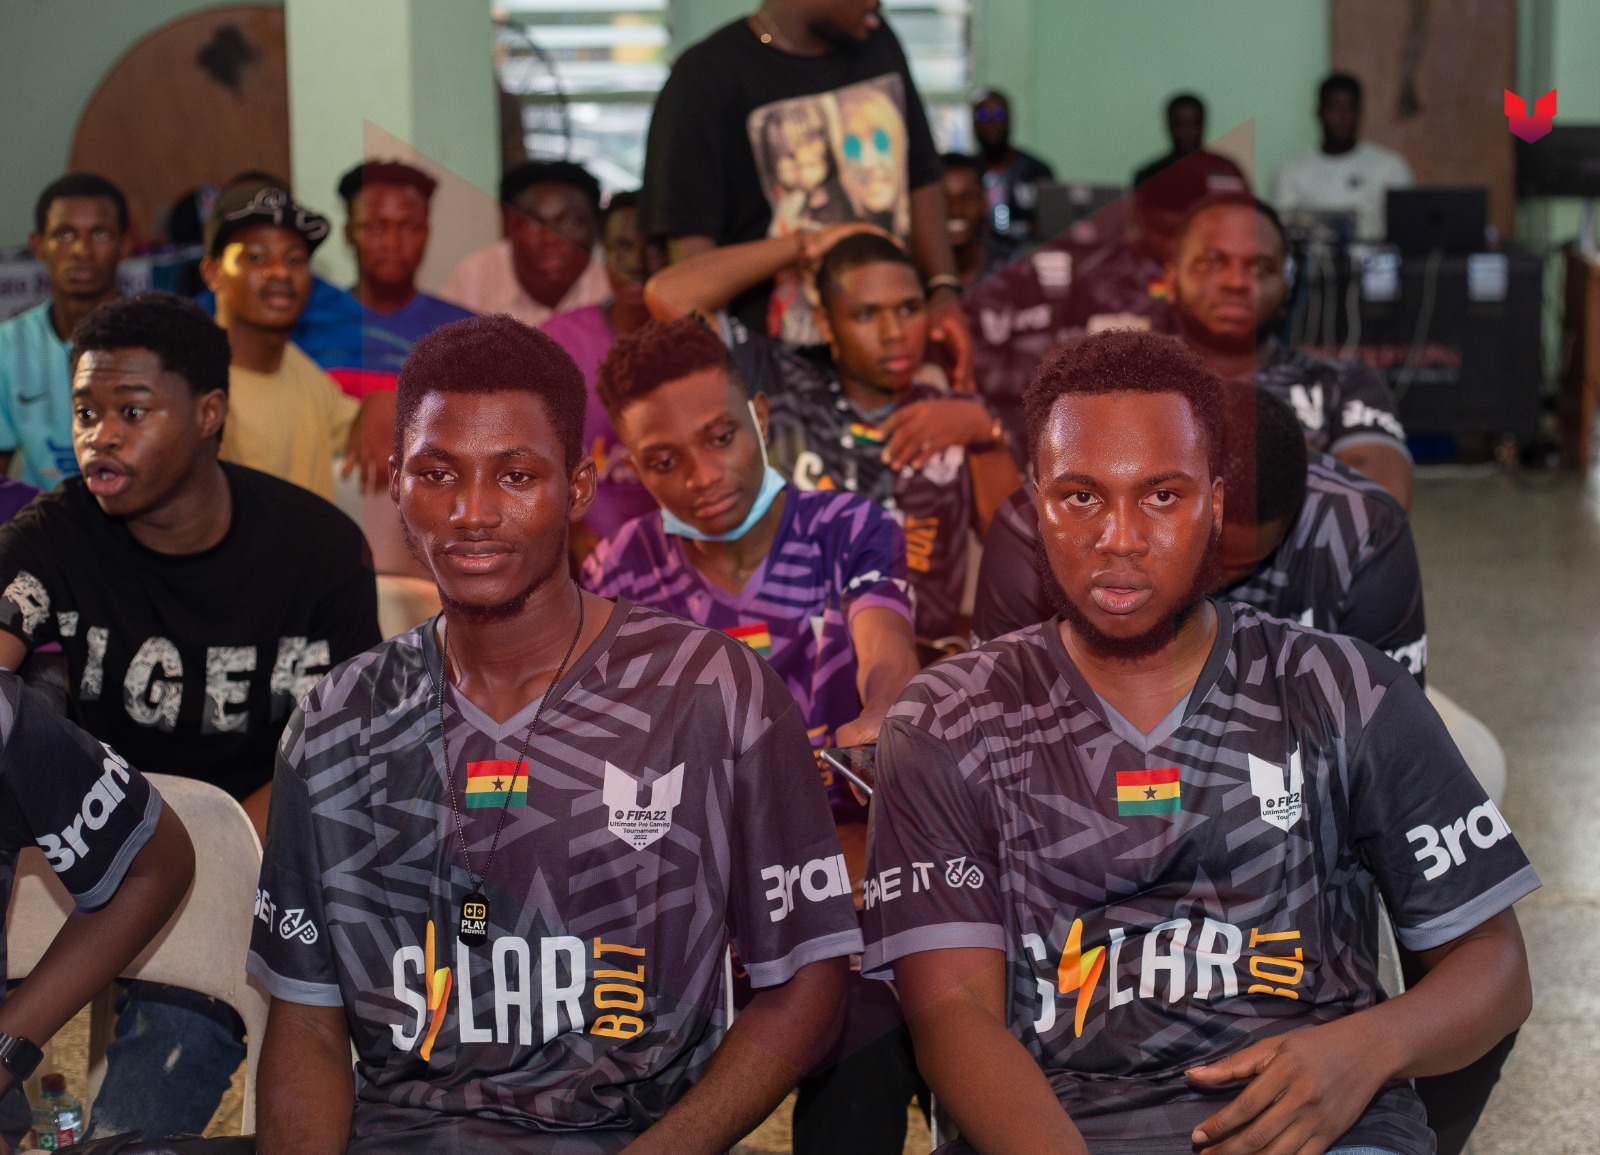 UPG FIFA22 Esports Tournament crowns PlayProvince 2022 Champions, brings Ghana's Esports Scene to new heights